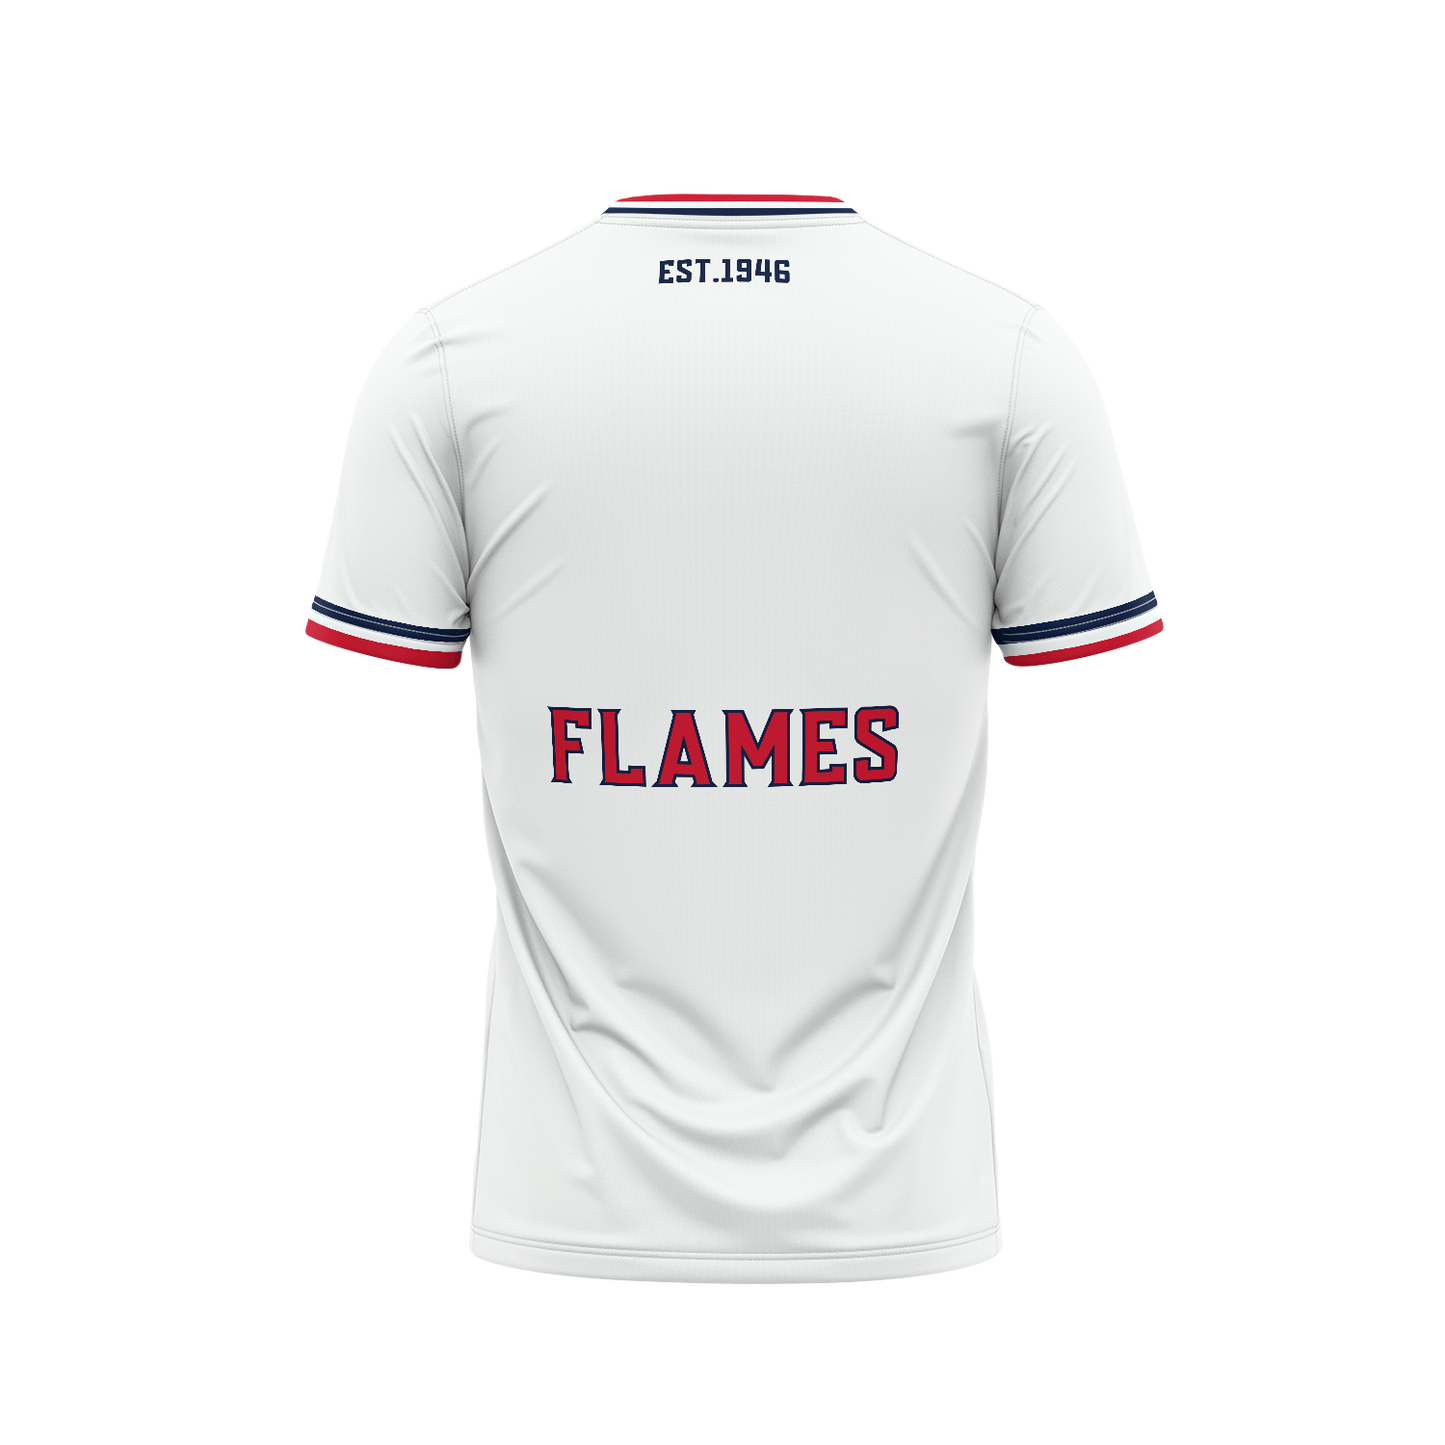 NORWOOD FLAMES - SUPPORTER JERSEY WHITE (NO NUMBER)